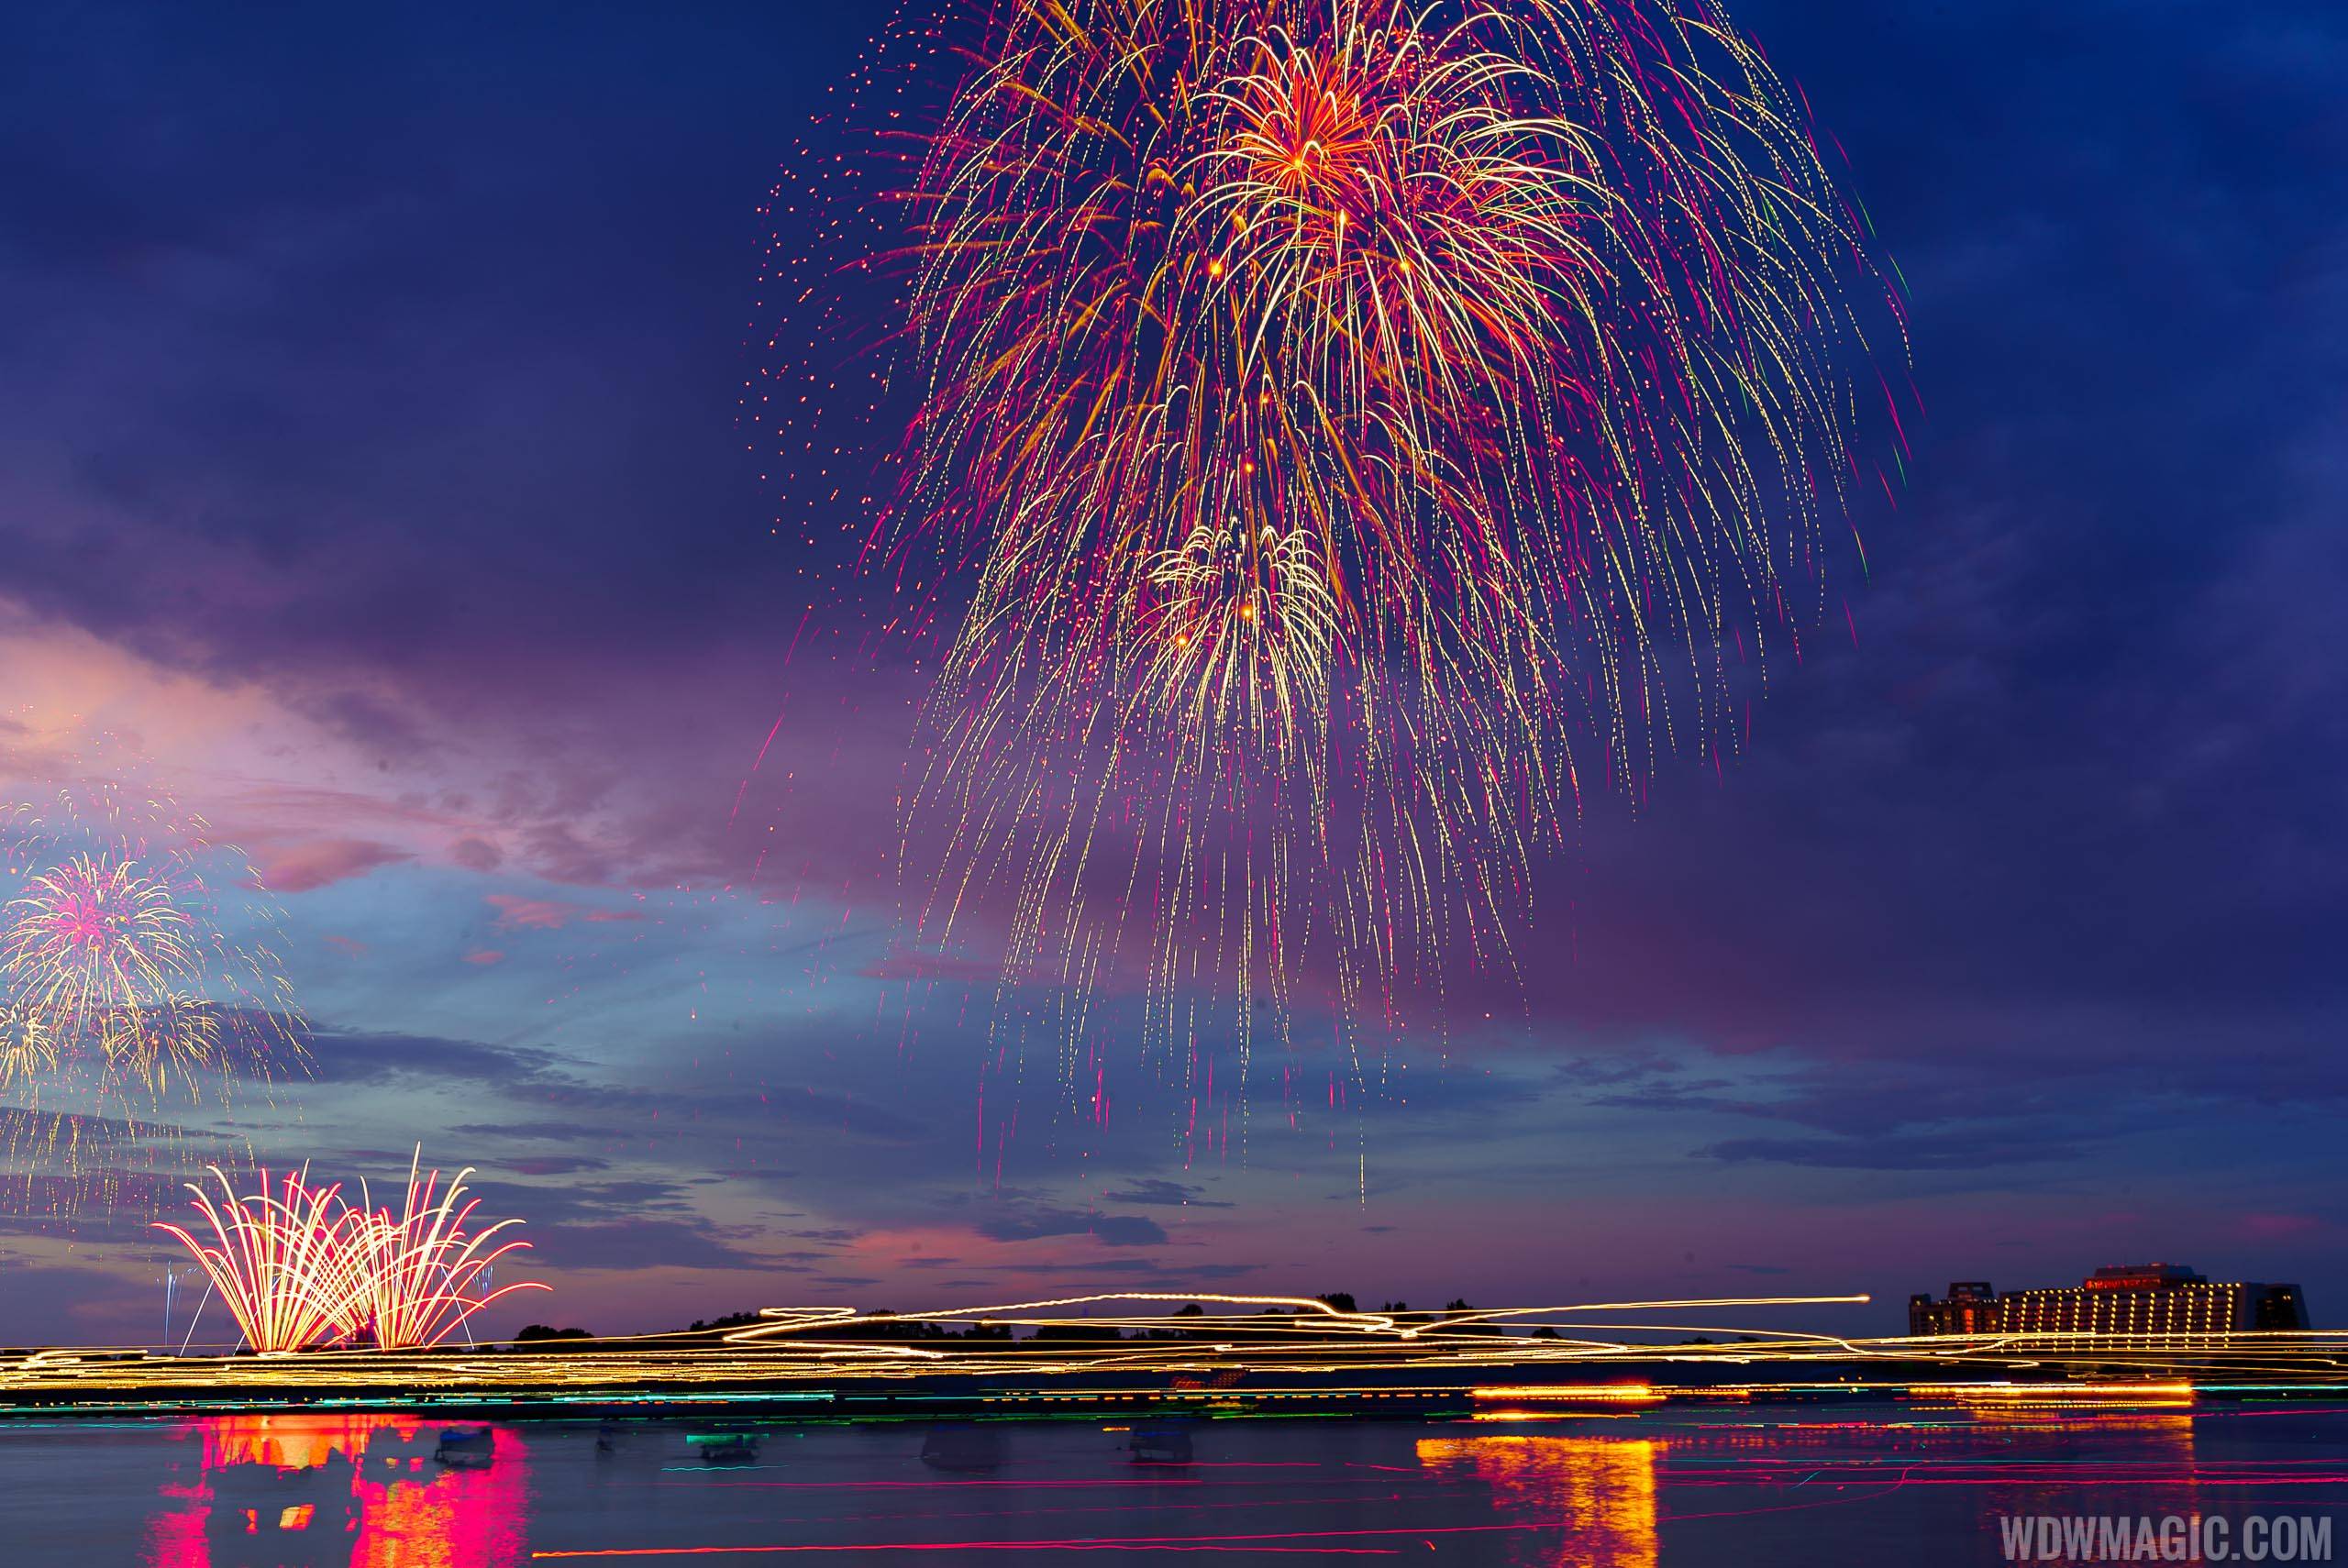 VIDEOS - The best Walt Disney World firework shows you might not have seen